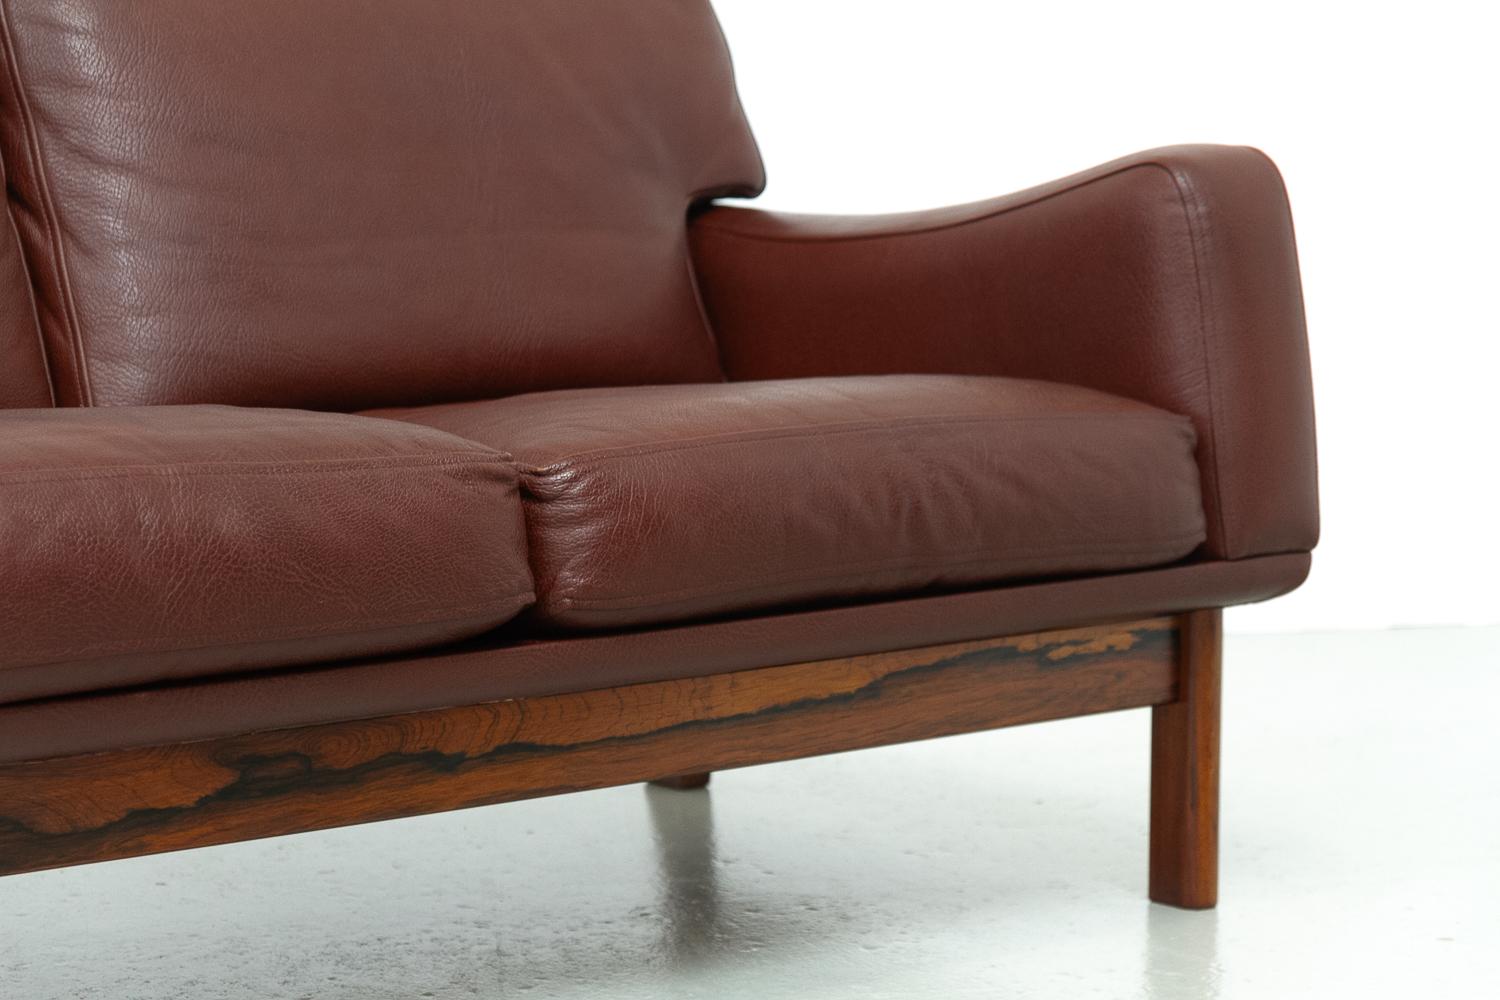 Mid-20th Century Danish Modern Leather and Rosewood Sofa by Eran, 1960s. For Sale